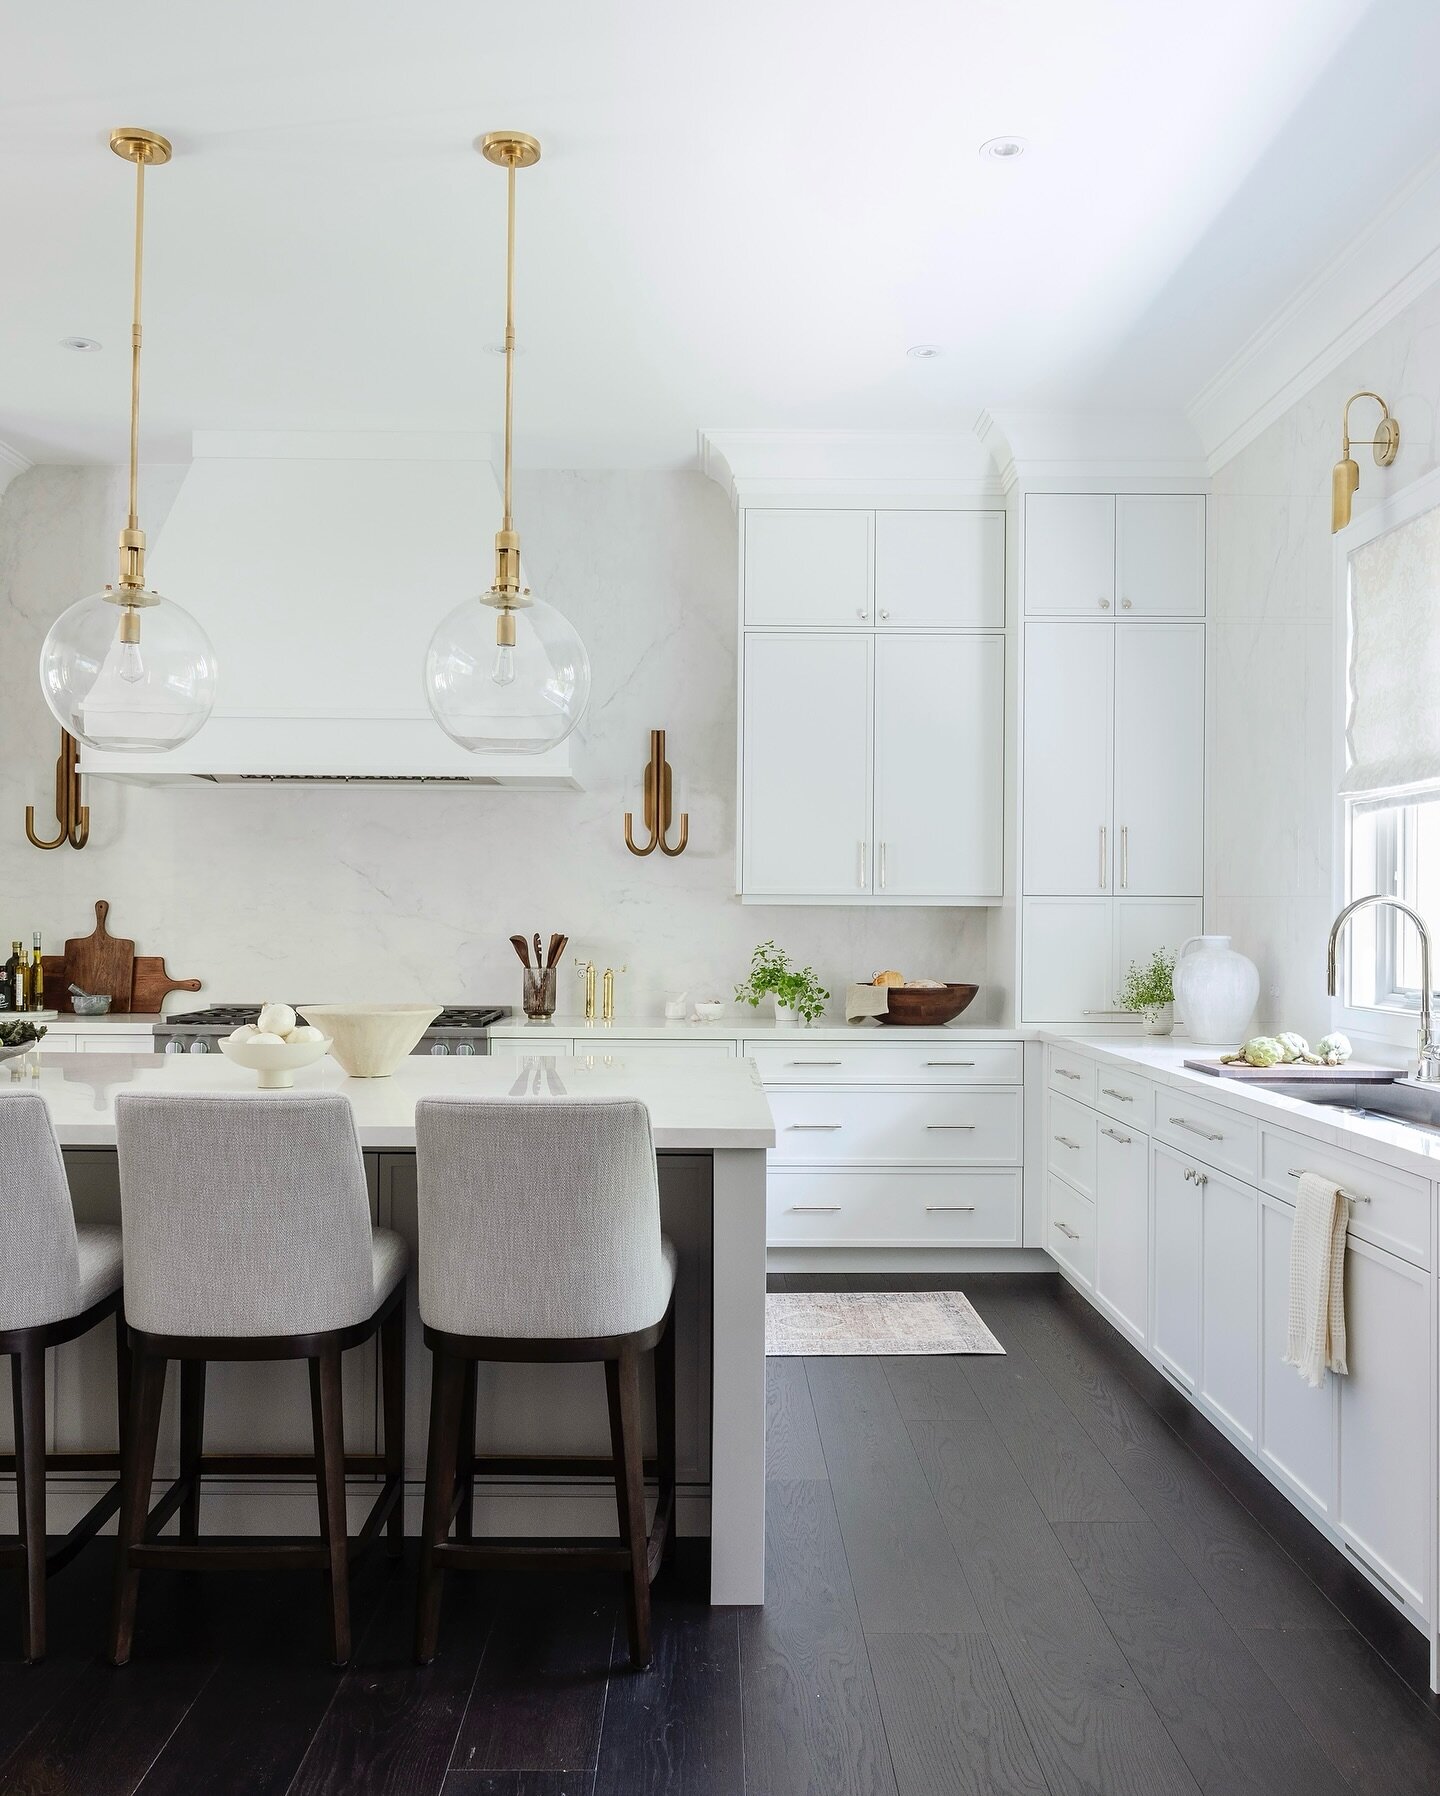 Weekend ready ~ bring it on please! After a busy week wouldn&rsquo;t it be fabulous to spend your weekends, cooking, dining and entertaining in this kitchen? 

📸 @kerri.torrey | Design @karinkolbinteriors | Styling @cat_therrien | Project Tecumseh P